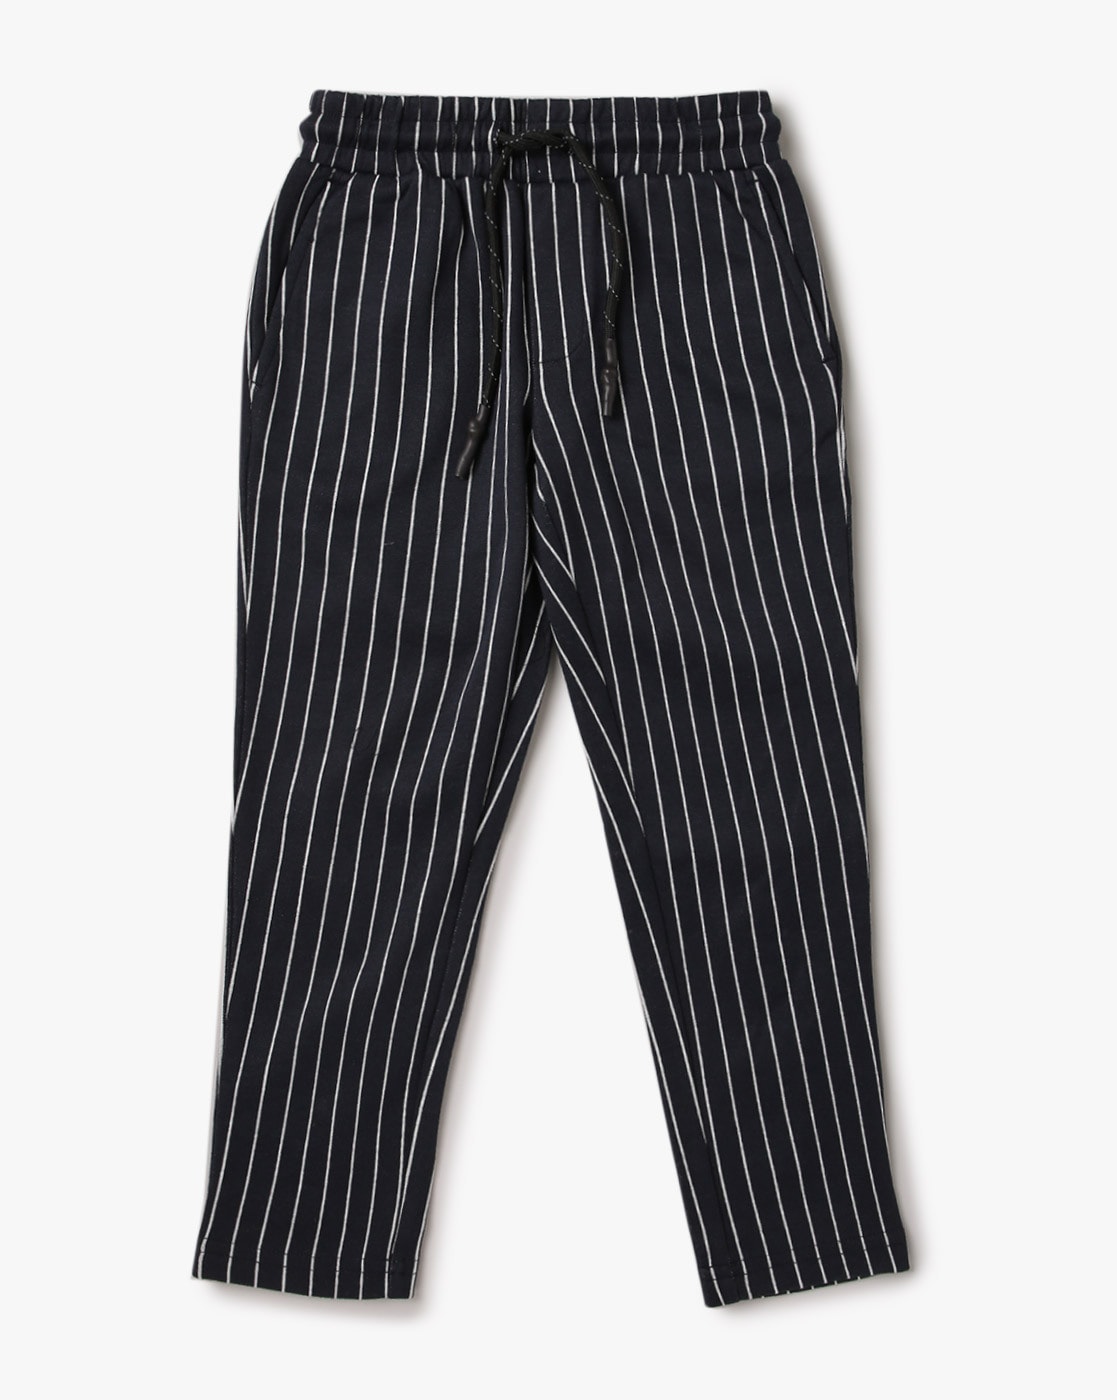 Luxury trousers for women - Dolce & Gabbana gray striped trousers